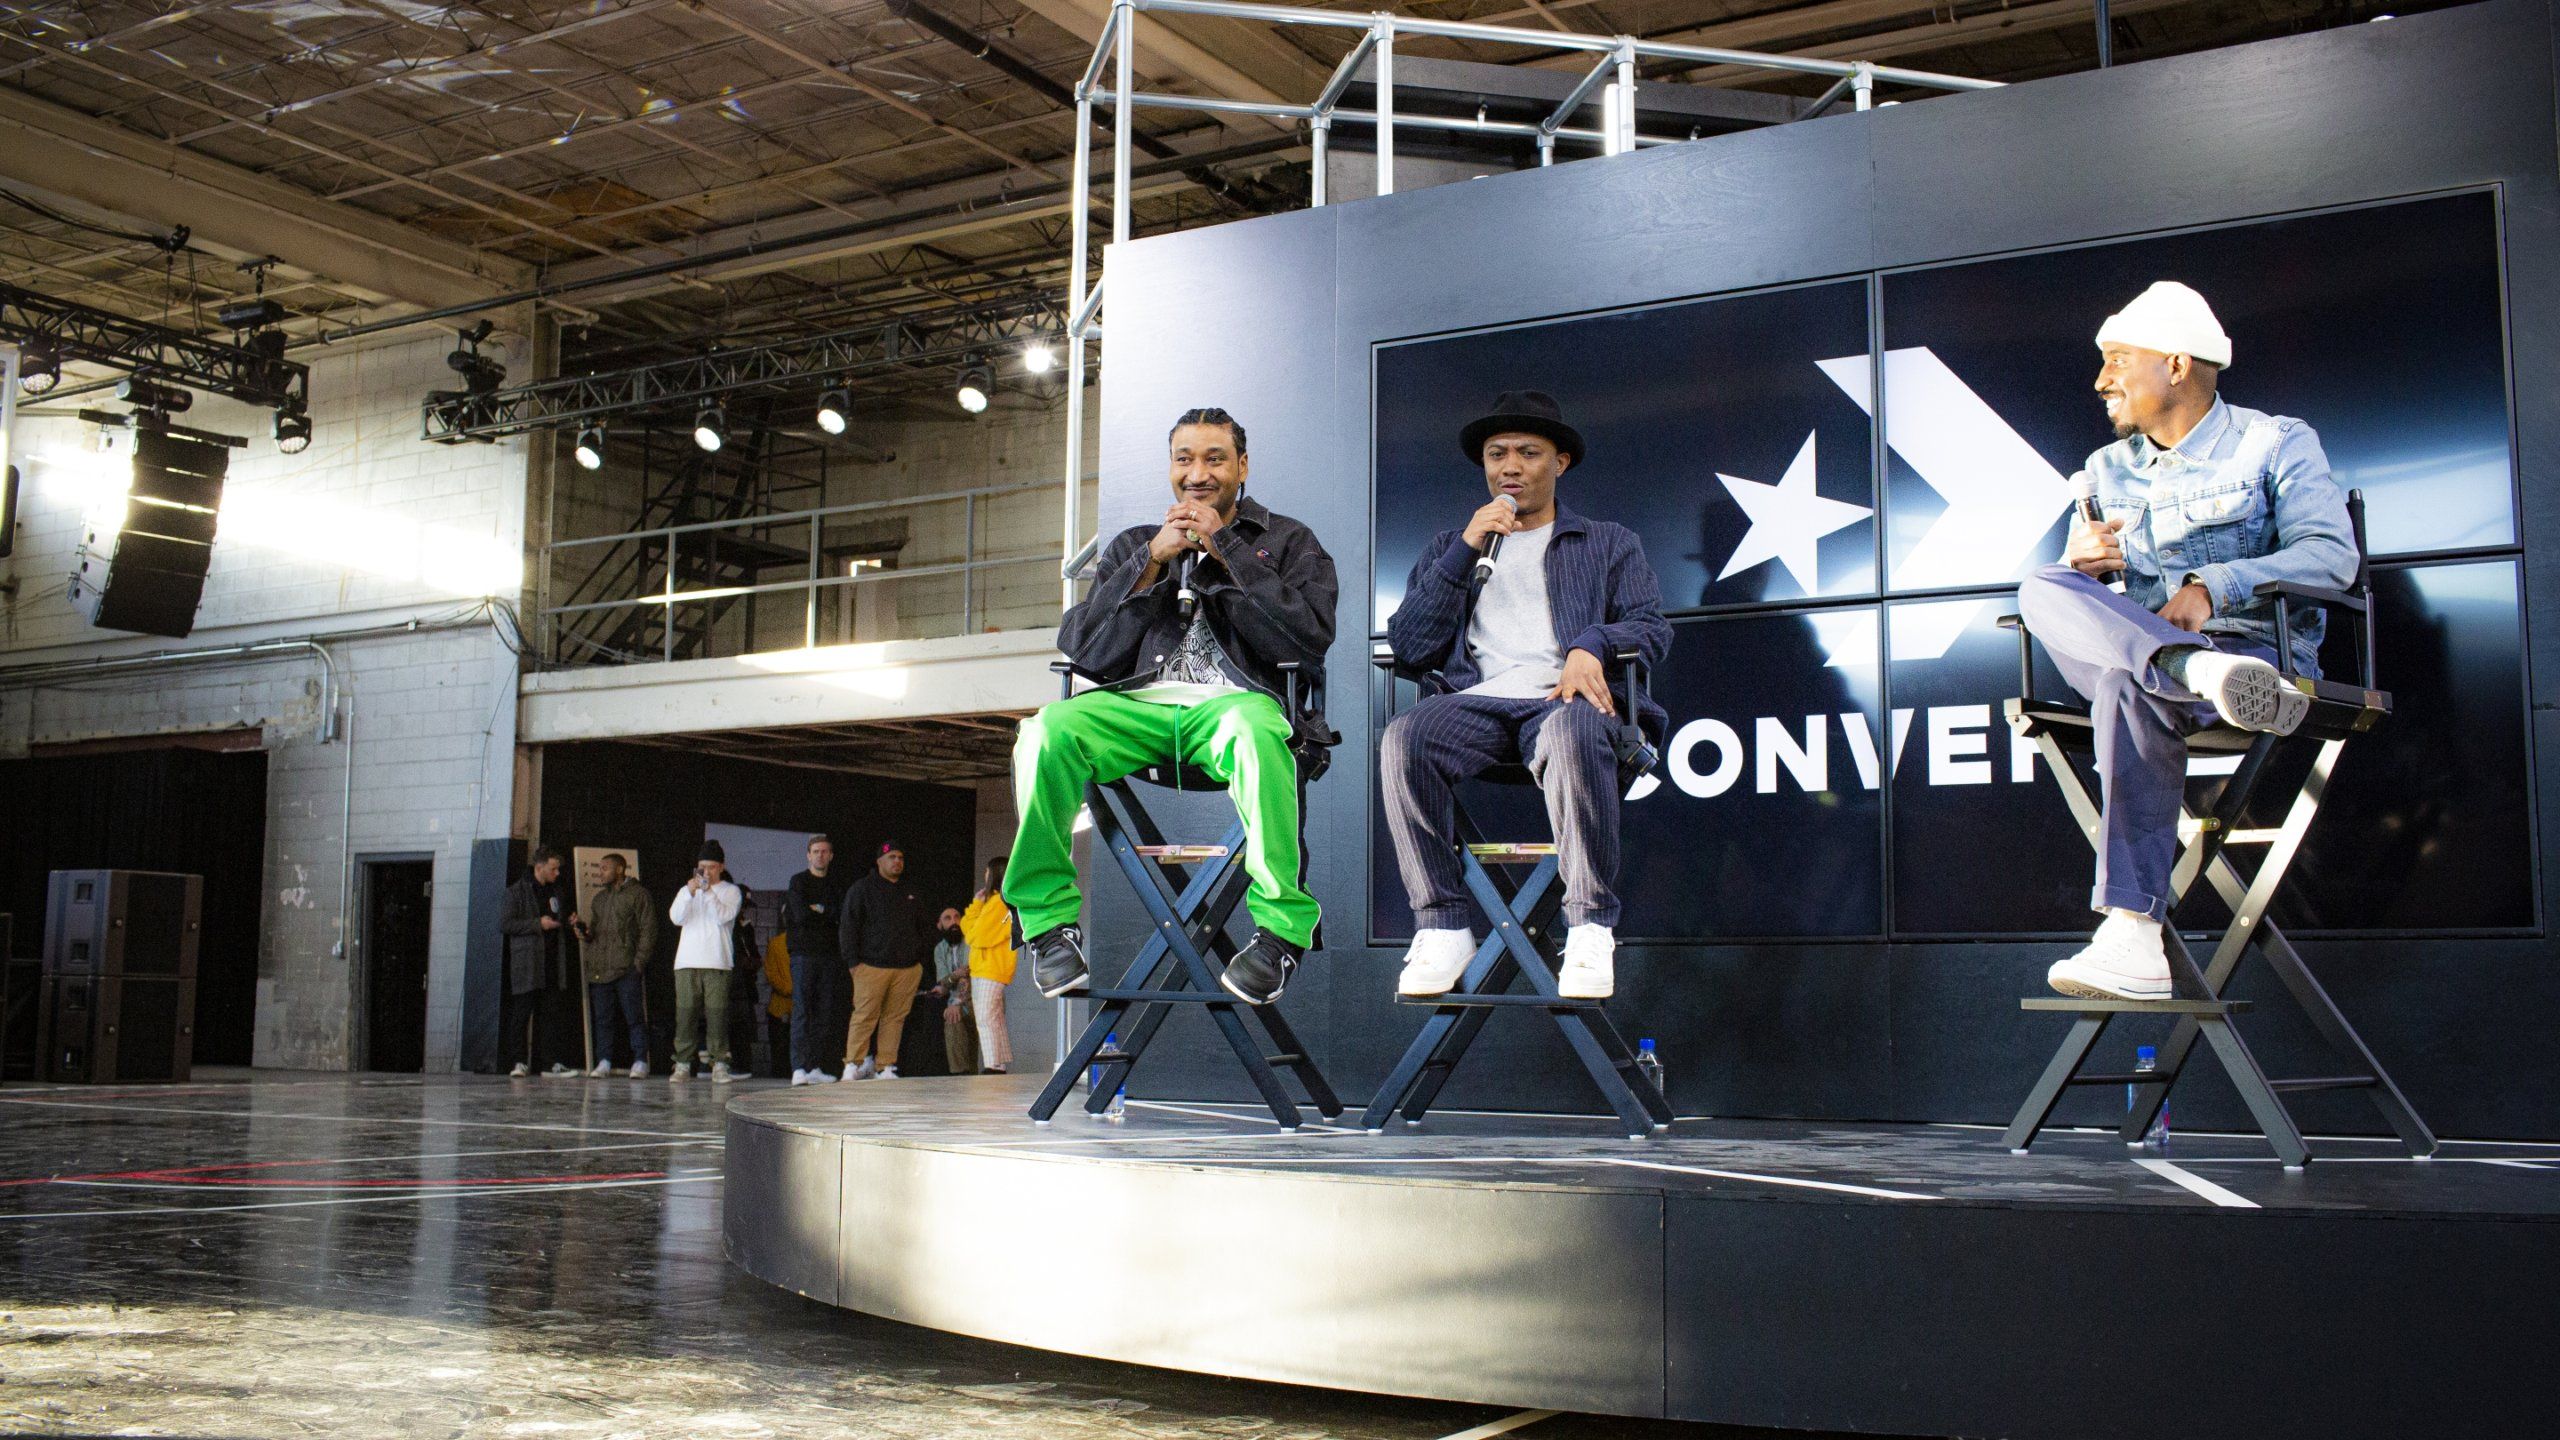 Panel of three artists sit in director's chairs with microphones in front of Converse back drop